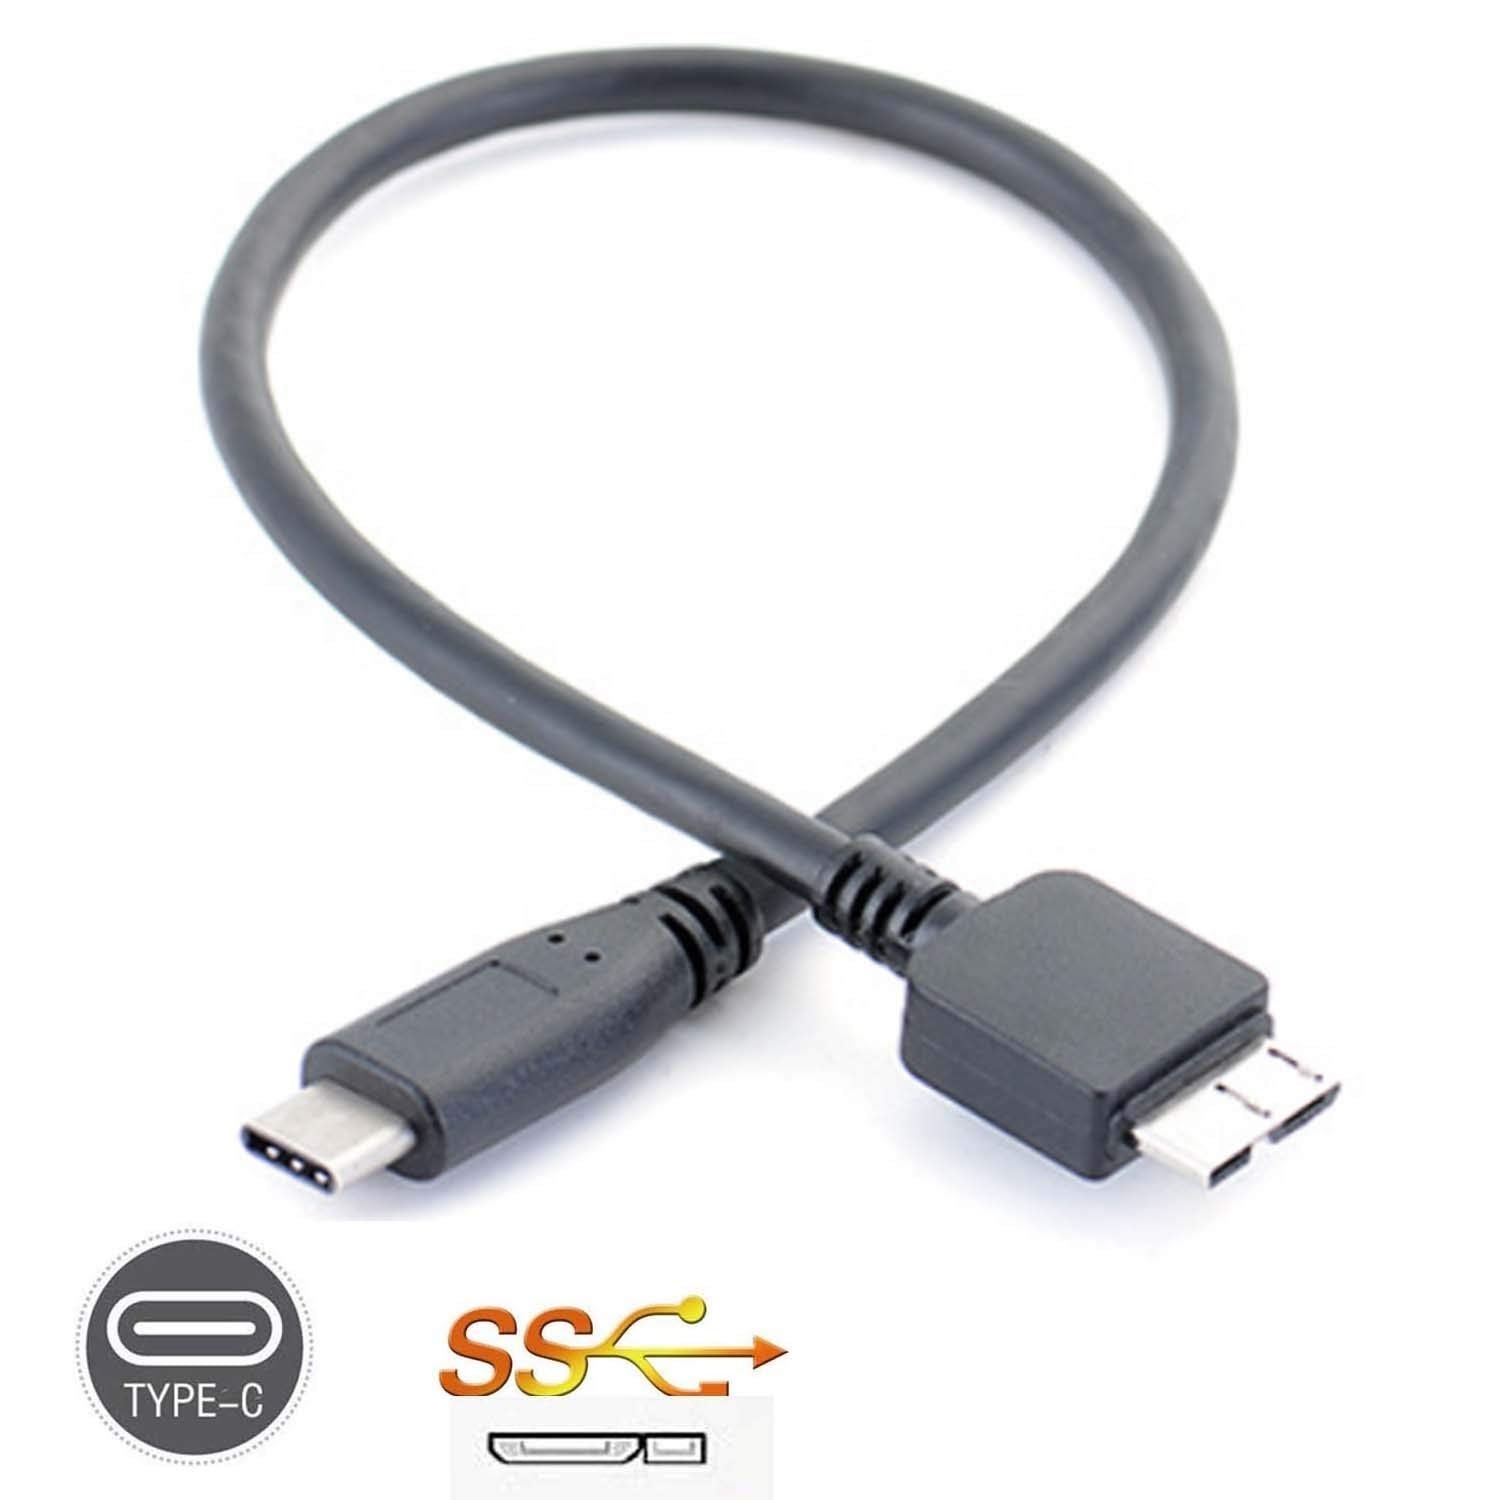 USB 3.0 to USB C 3.1 USB Cable for WD My Ultra External Drive HDD, Black | Hellfire Trading